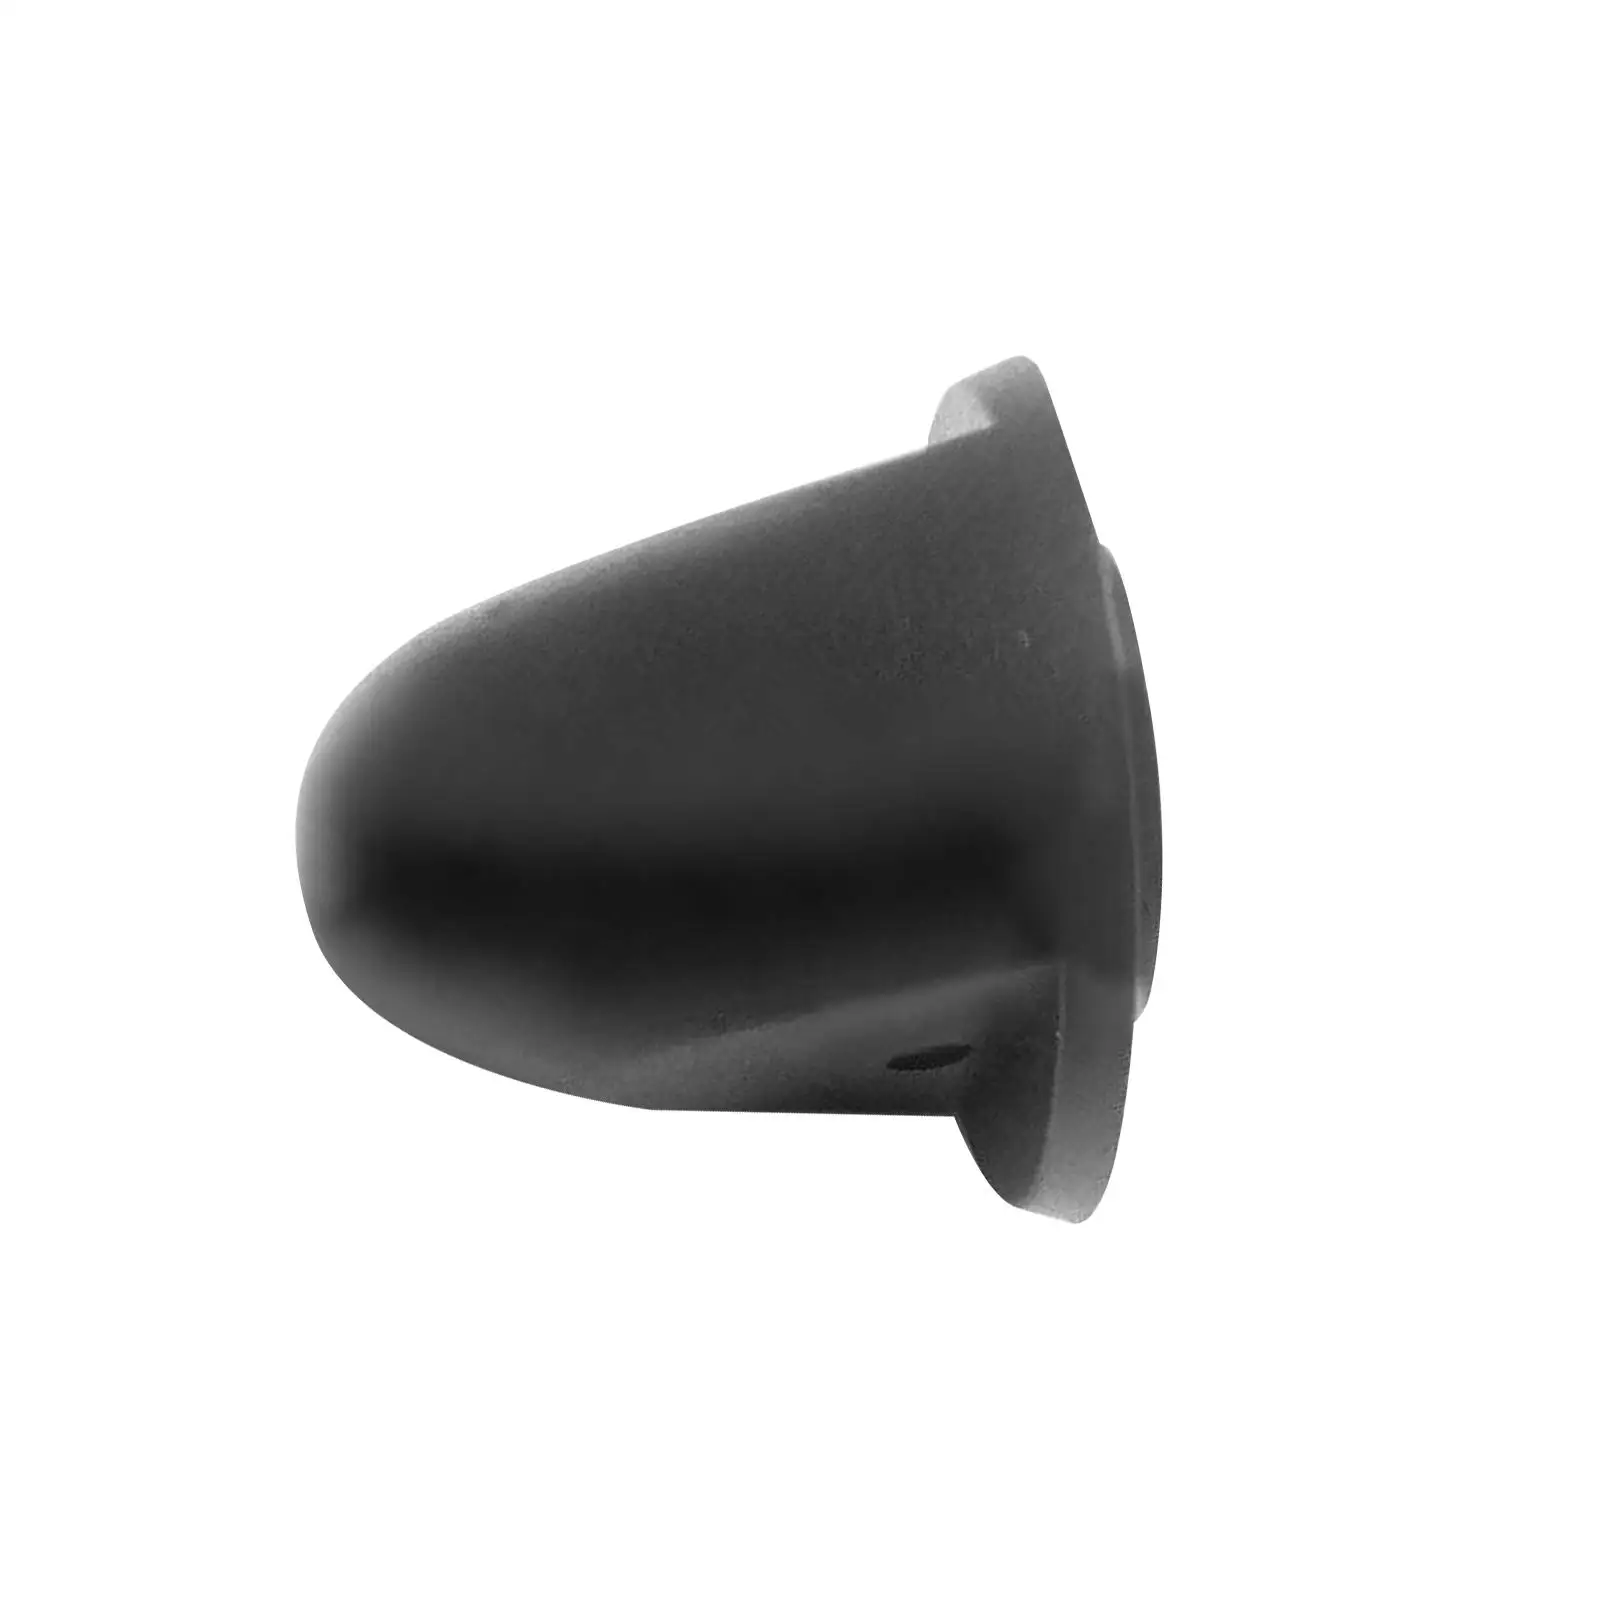 Propeller Prop Nut 647-45616-02-00 for Yamaha Outboard Engine 4HP 5HP 2 Stroke Durable Easy Installation